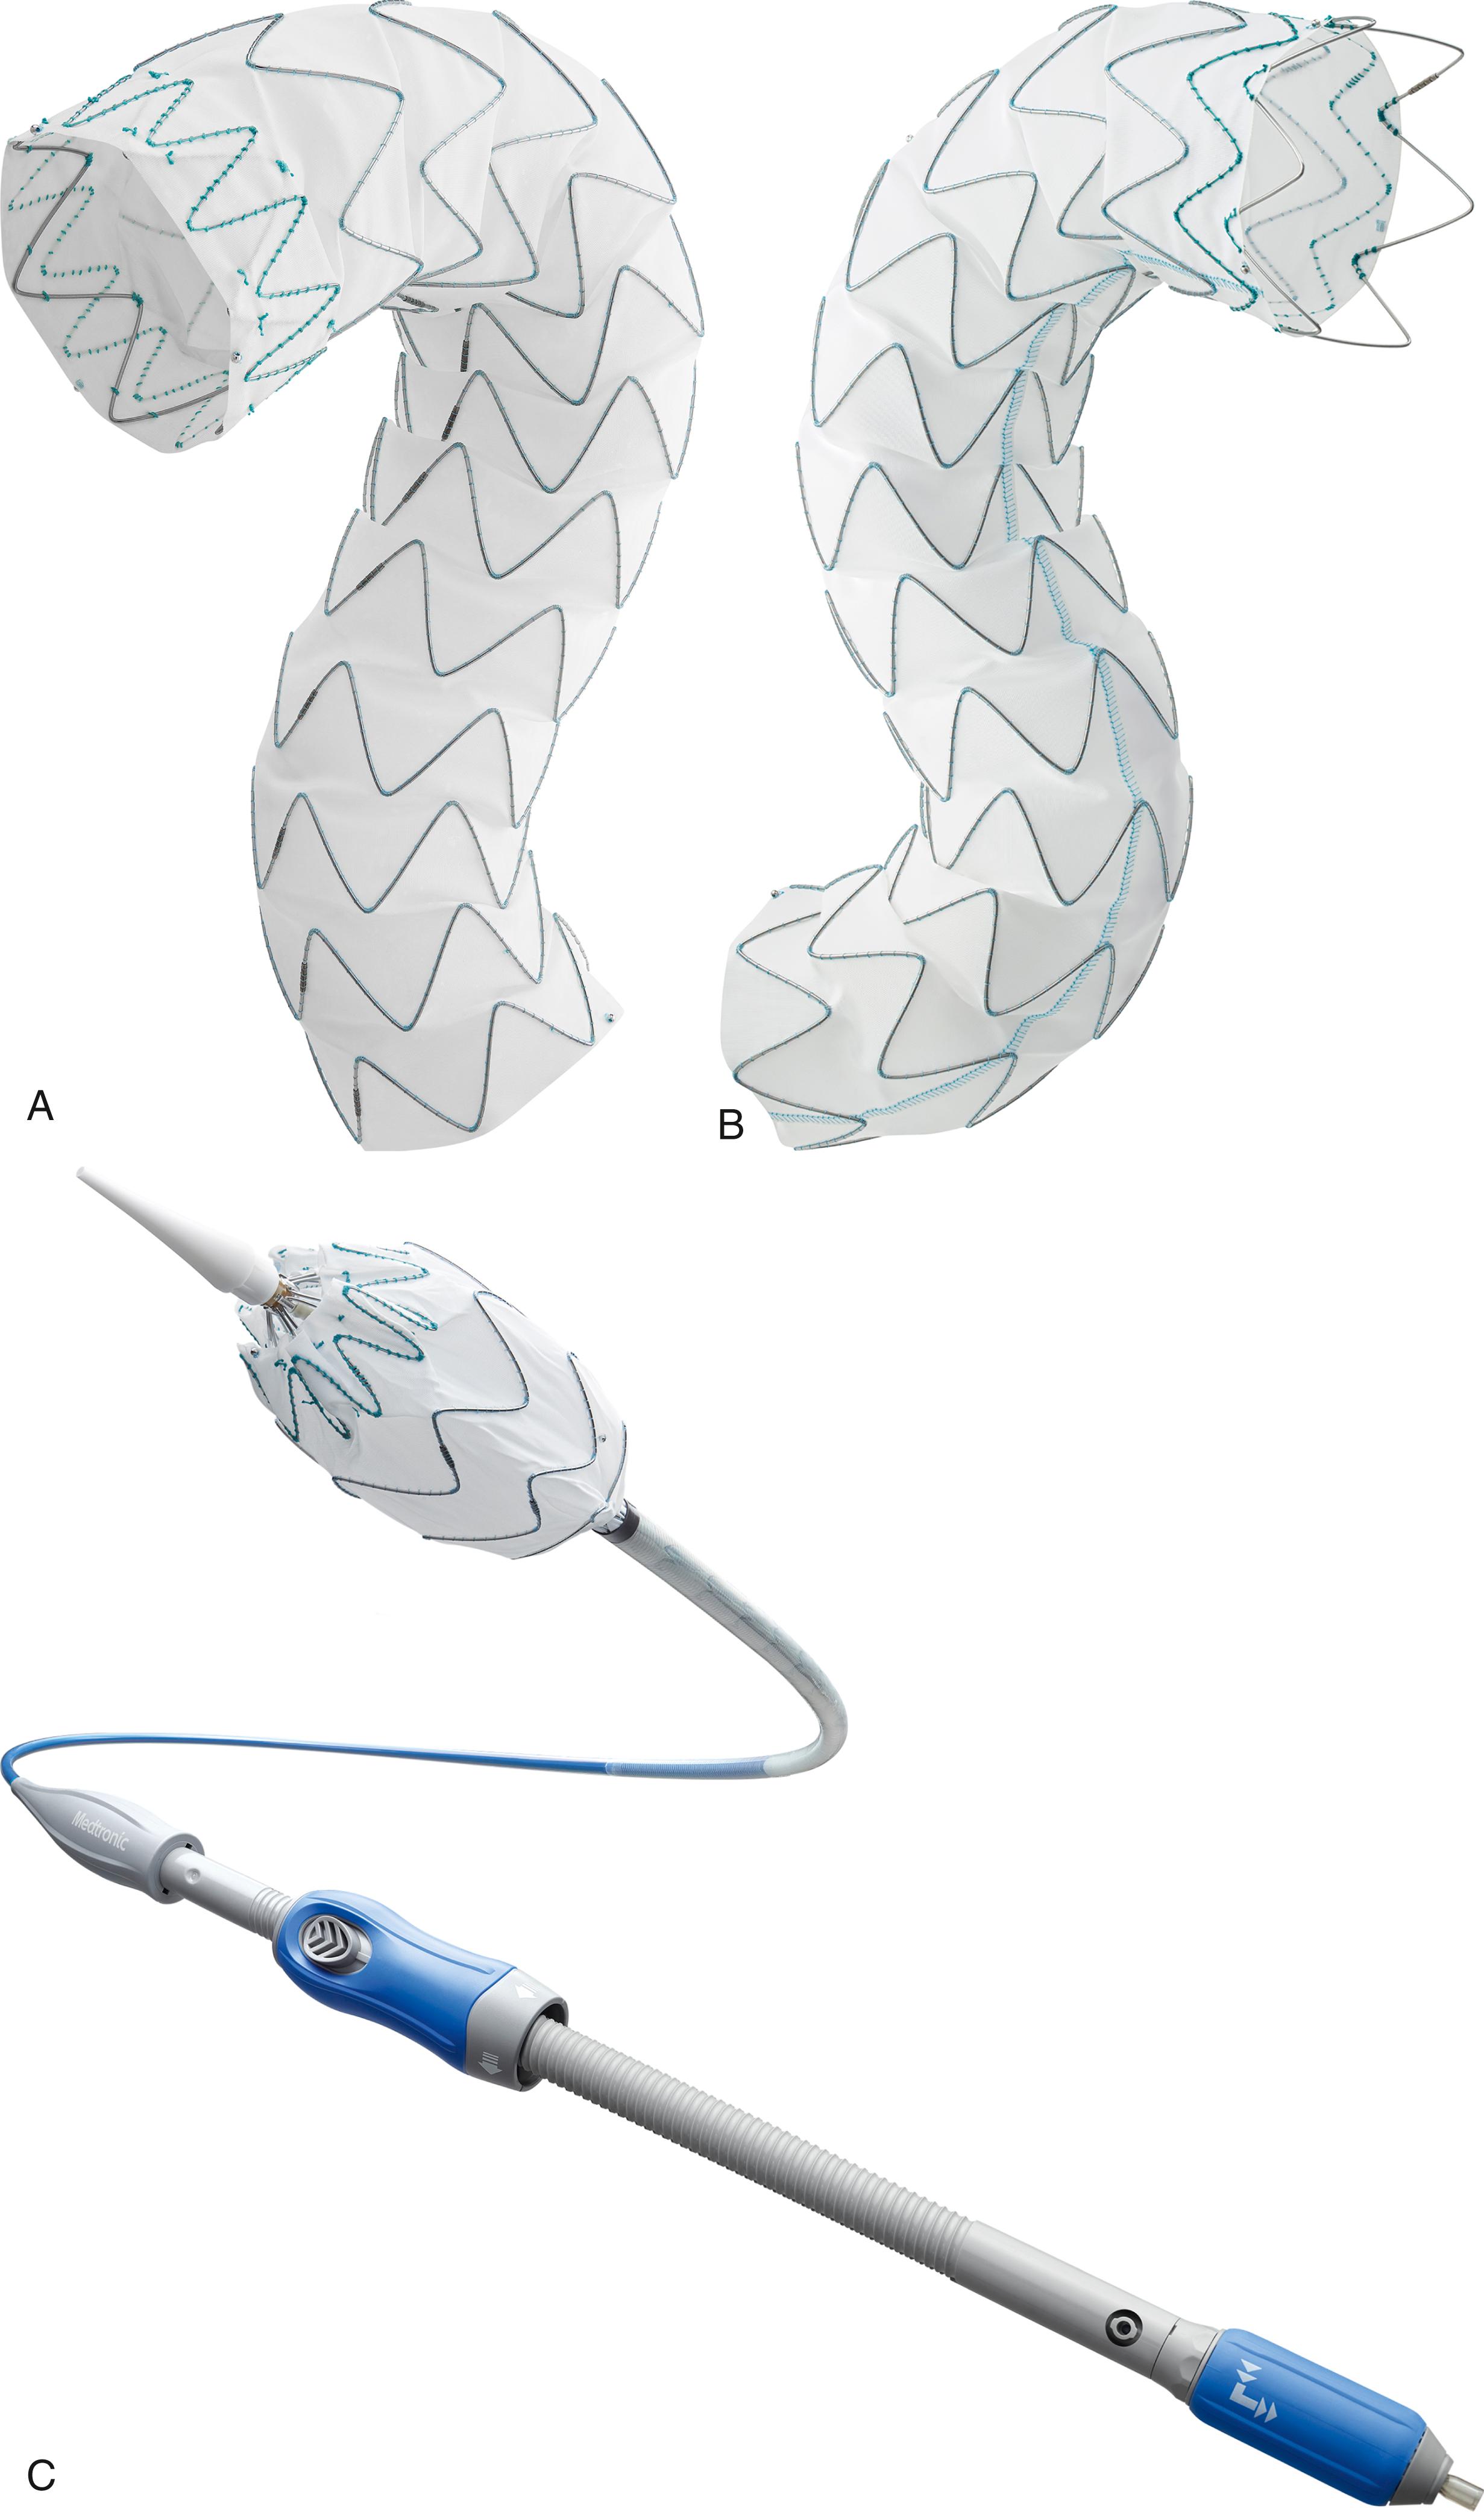 Figure 80.2, ( A ) Medtronic Valiant Navion Thoracic Stent Graft System Freeflo design. ( B ) Medtronic Valiant Navion Thoracic Stent Graft System CoveredSeal design. ( C ) Medtronic Valiant Navion Thoracic Stent Graft Delivery System with taper tip and short nosecone.